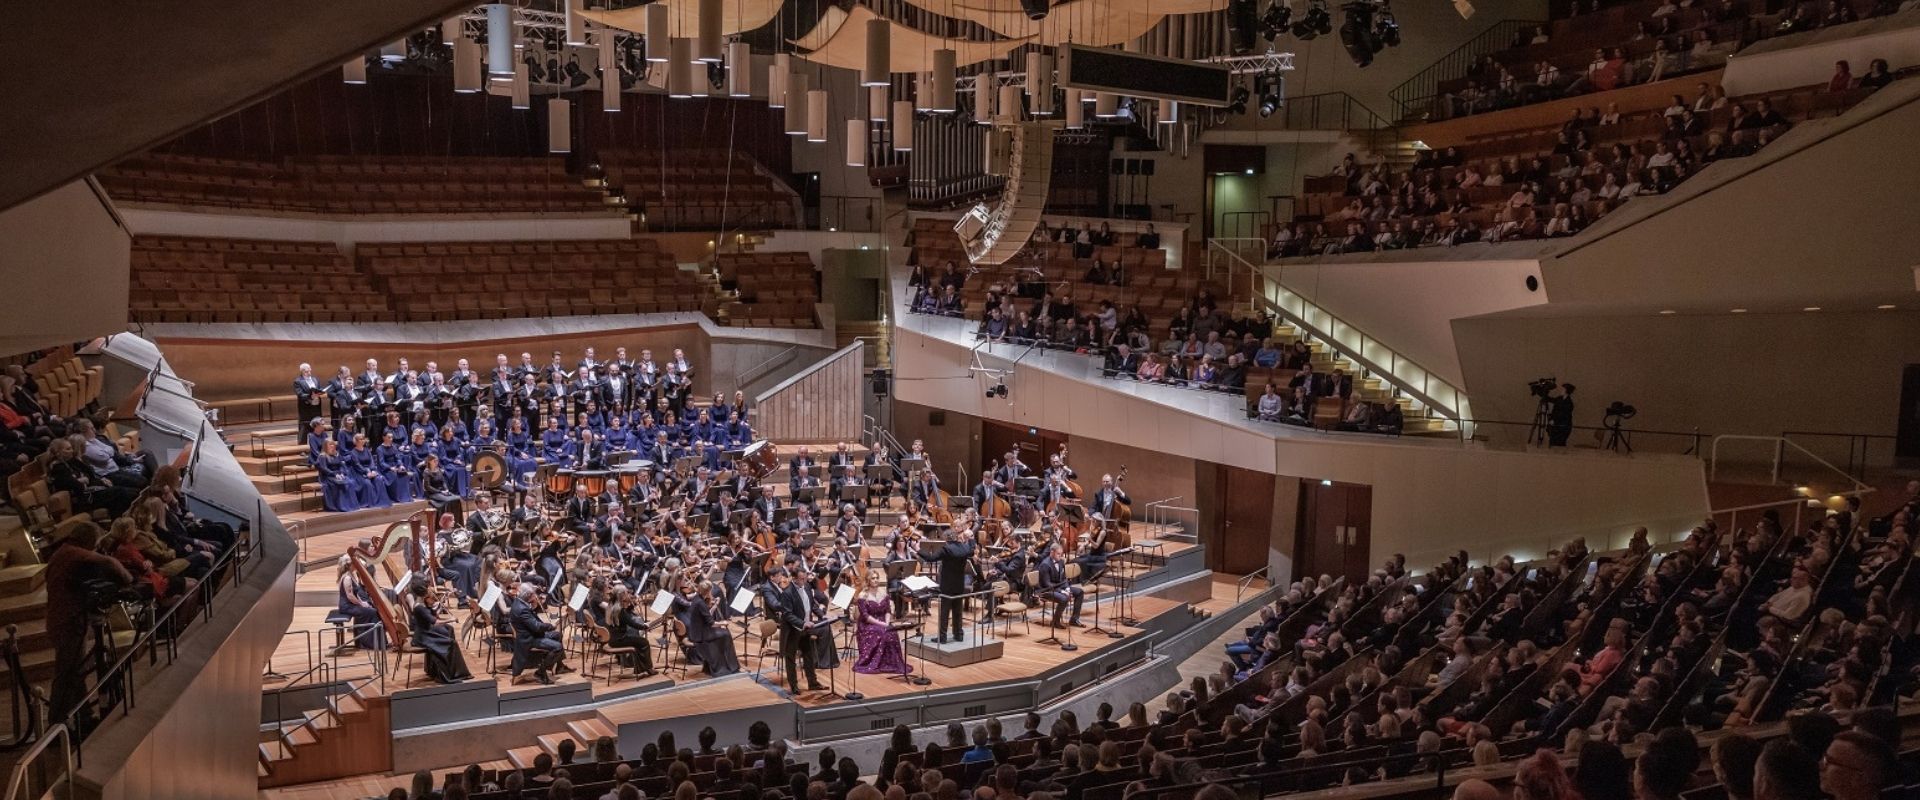 Poznań Opera House at Berlin Philharmonic: concert performance of “The Haunted Manor”